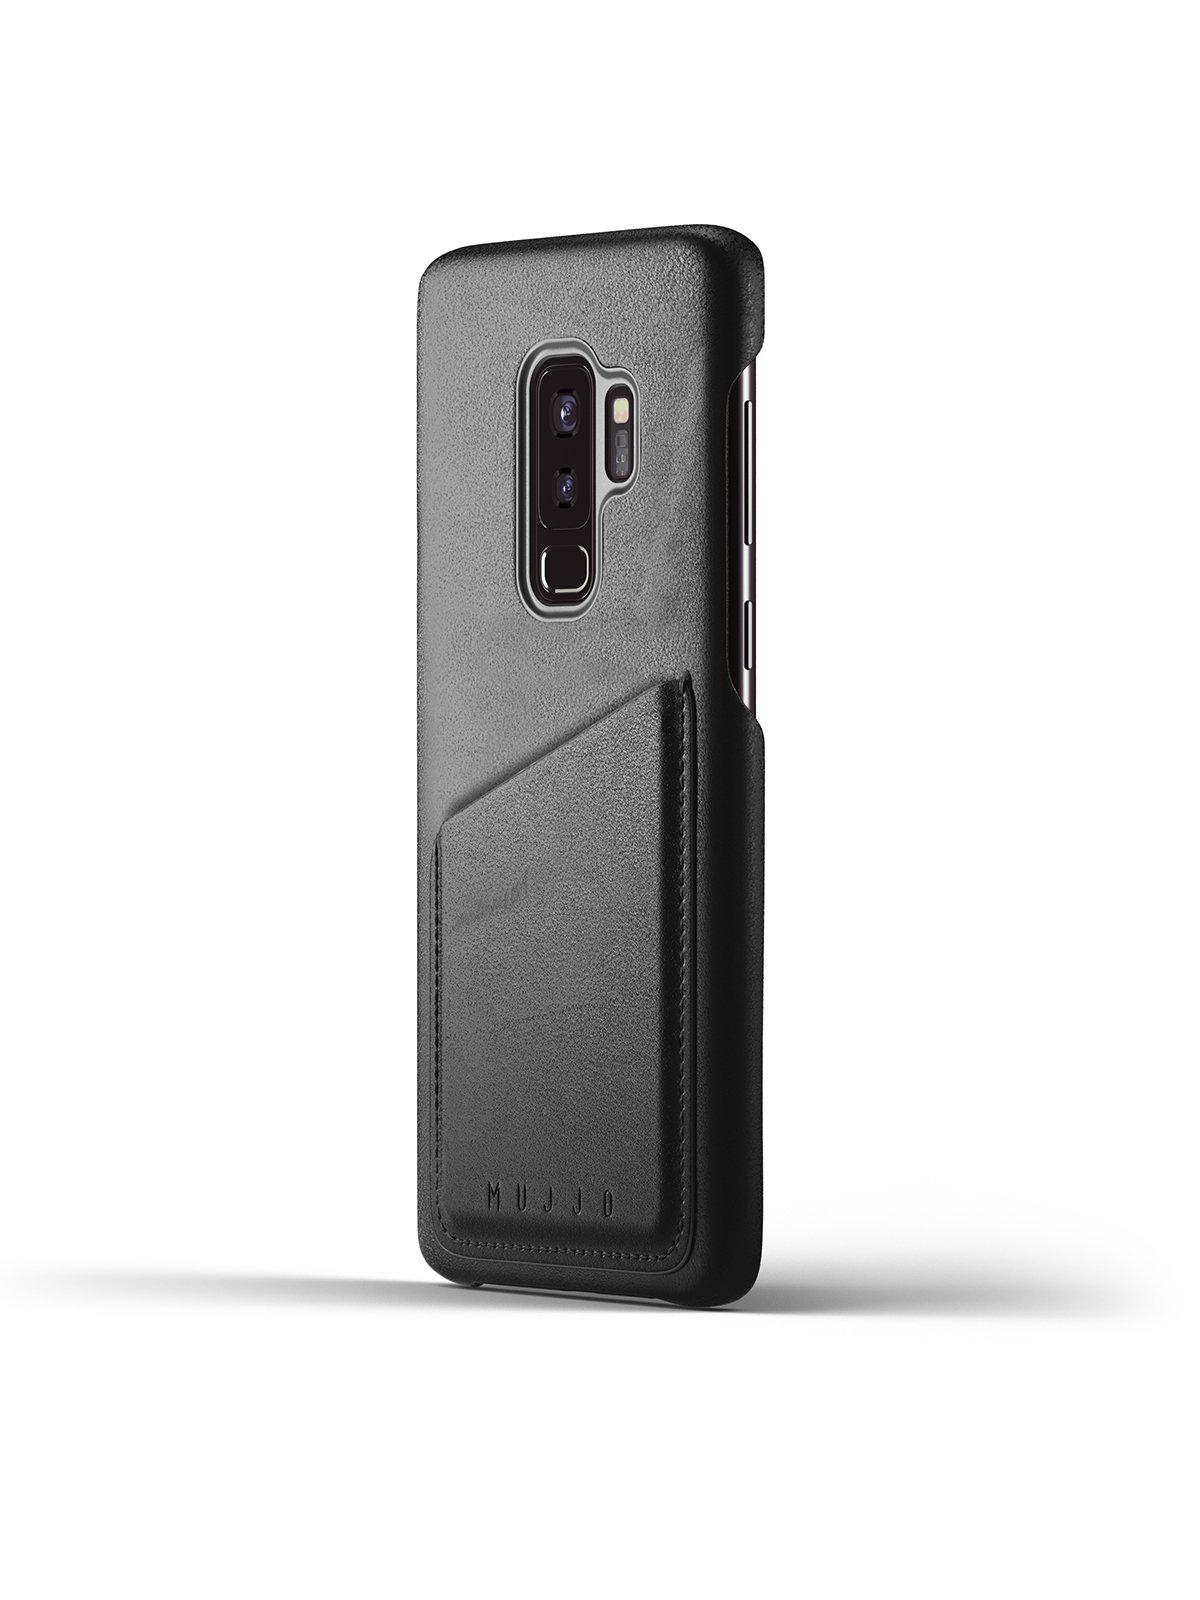 Mujjo Full Leather Wallet Case for Galaxy S9 Plus Black - MORE by Morello Indonesia